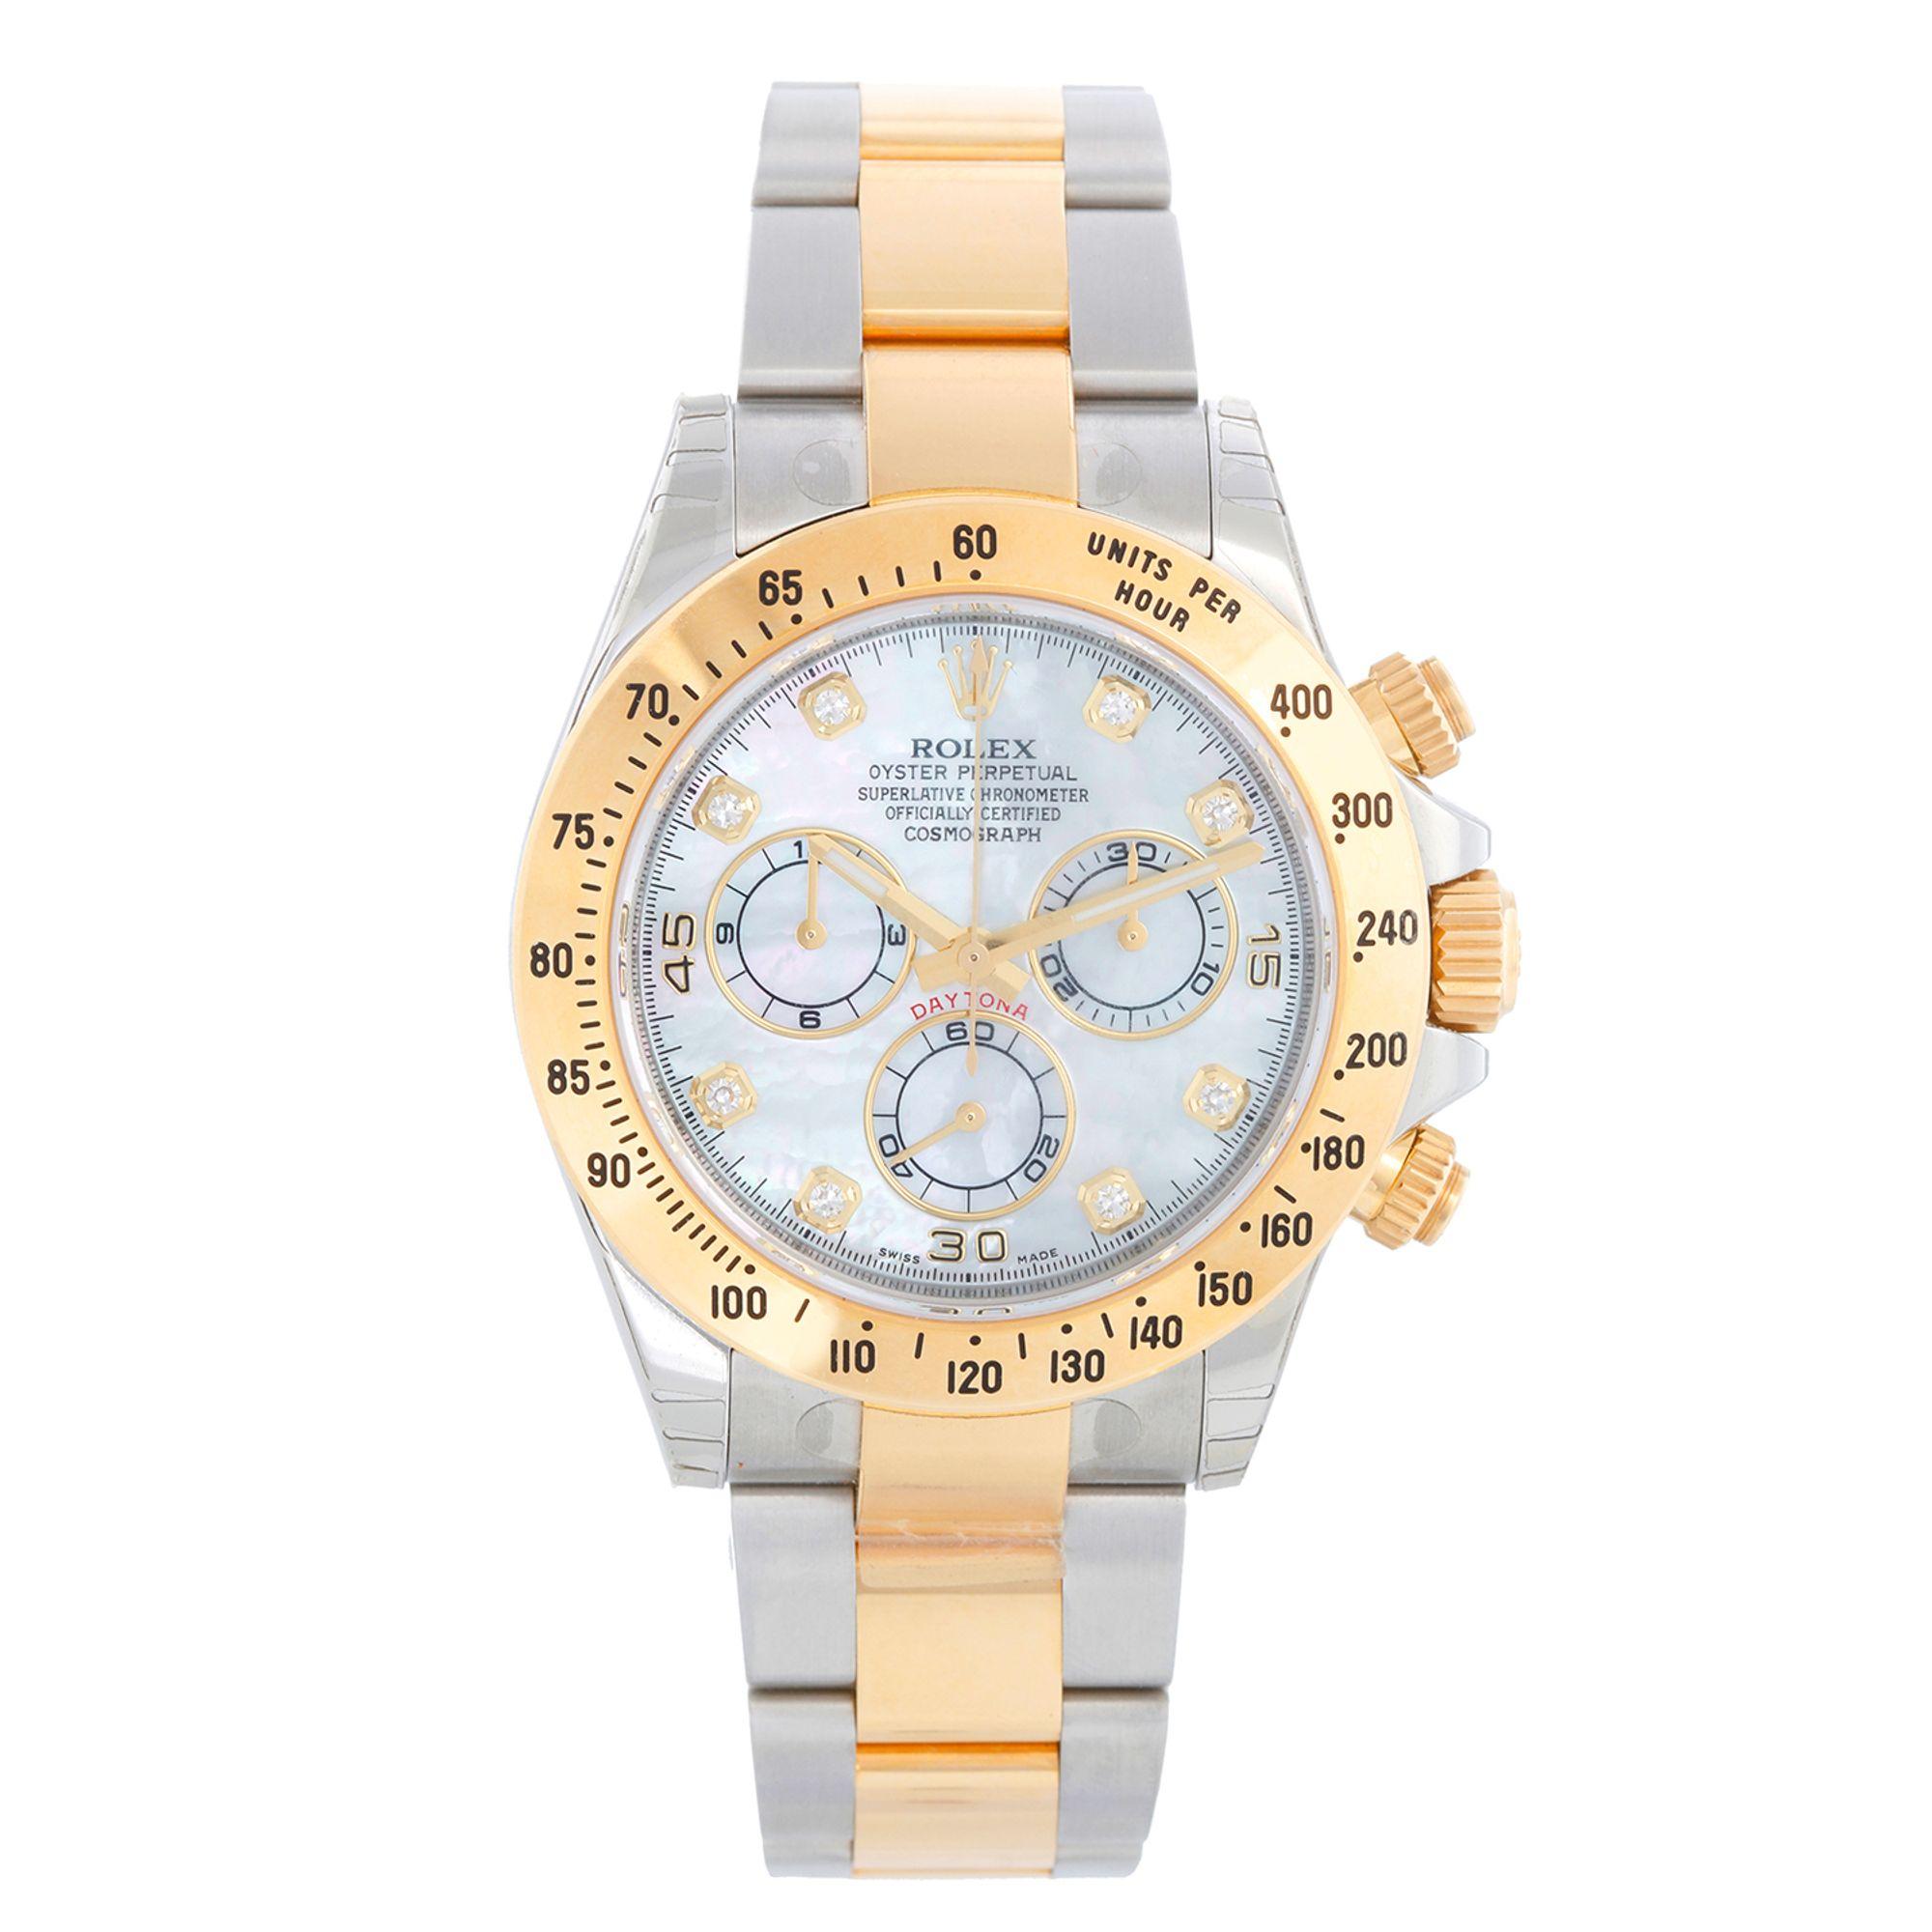 Rolex Cosmograph Daytona Men's Watch 116523 - Automatic winding, chronograph, 44 jewels, sapphire crystal. Stainless steel and 18k yellow gold; inner bezel engraving . Factory mother of pearl dial with diamond hour markers. Stainless steel and 18k